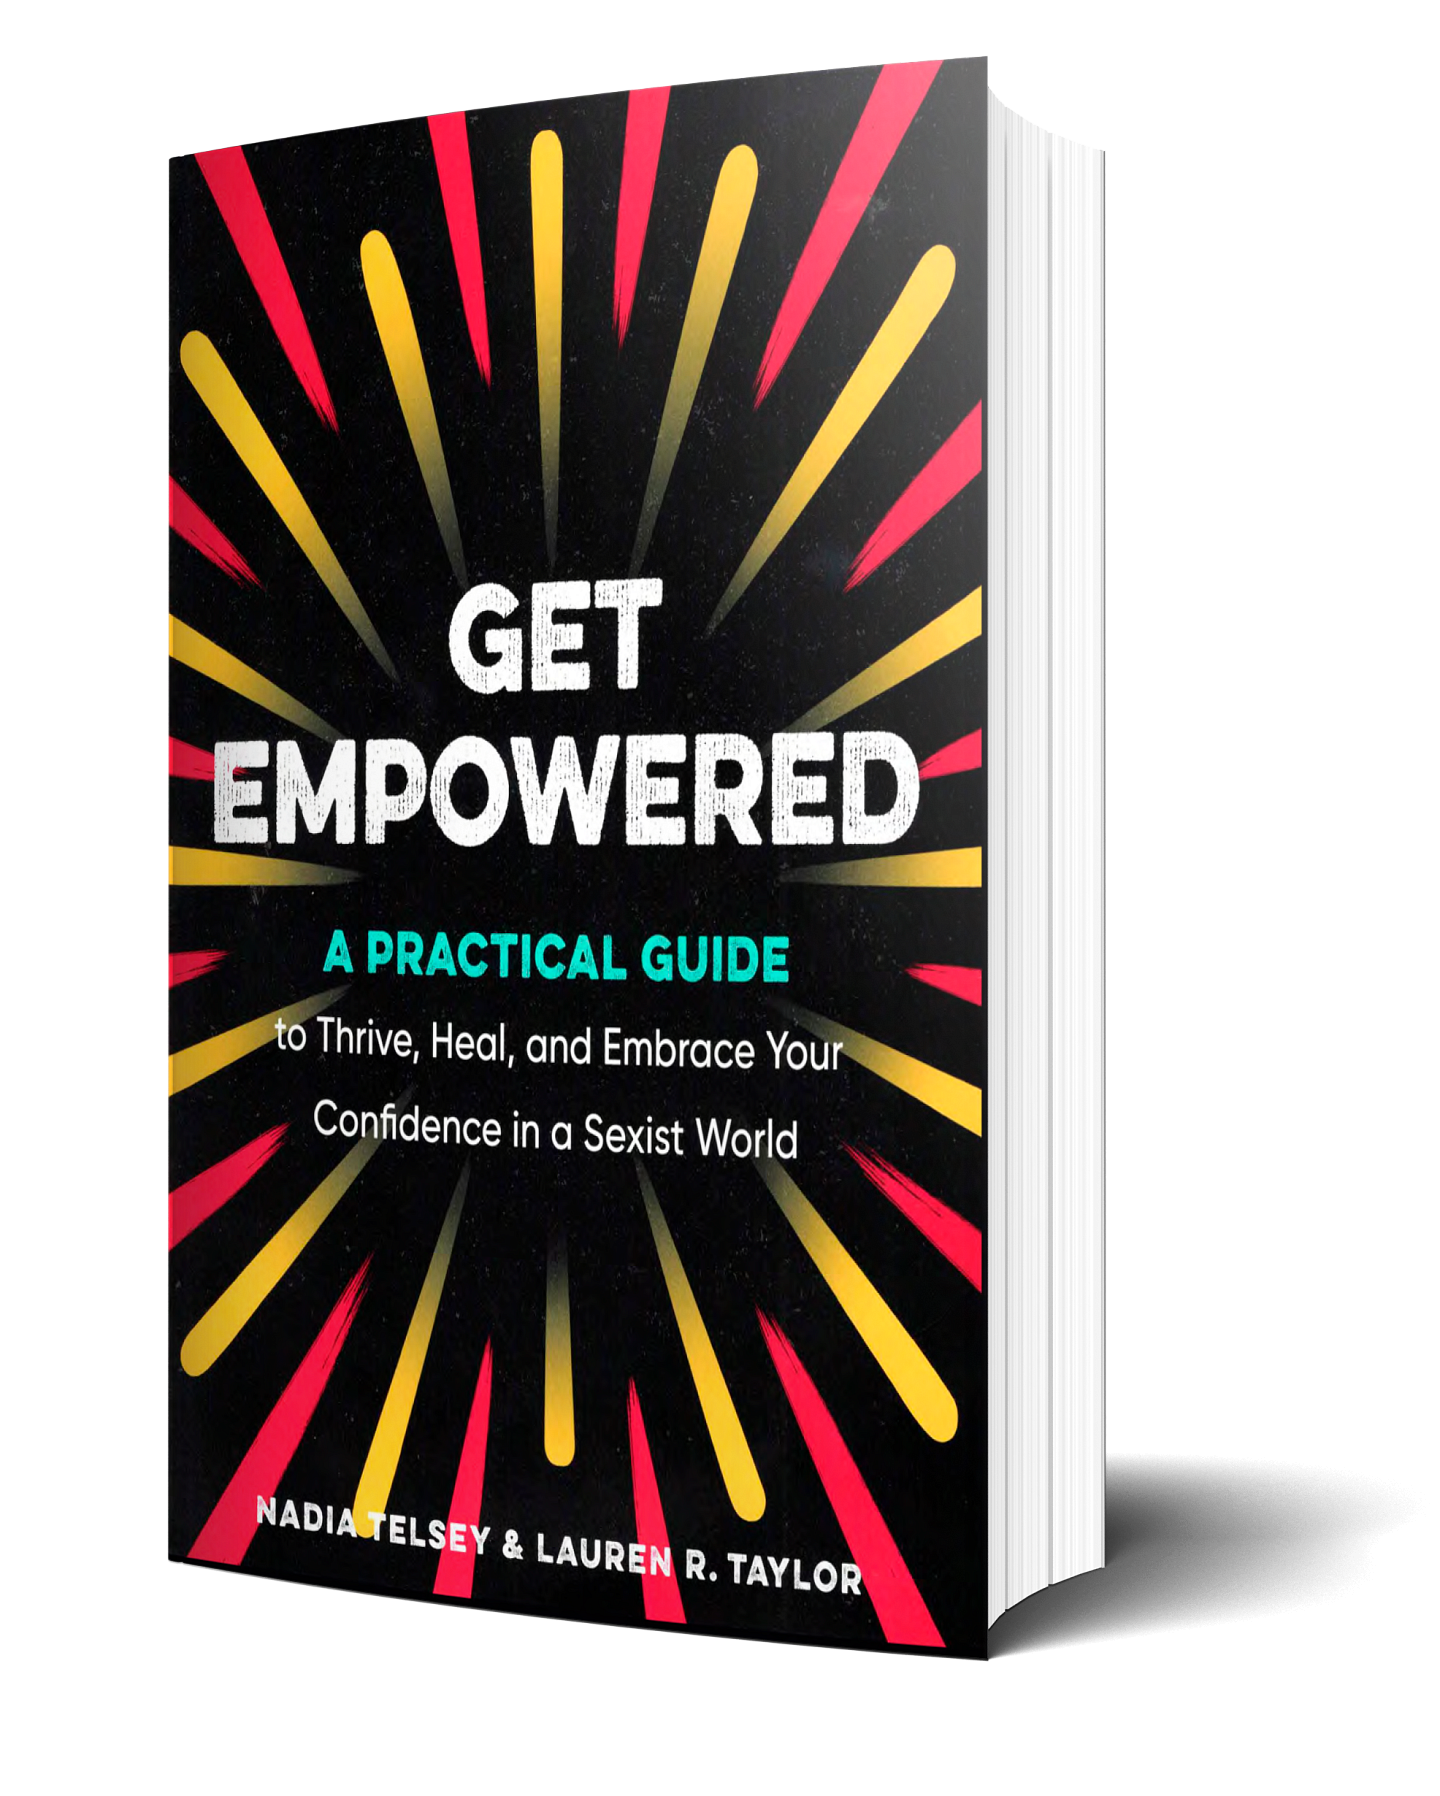 Get Empowered: A Practical Guide to Thrive, Heal, and Embrace Your Confidence in a Sexist World